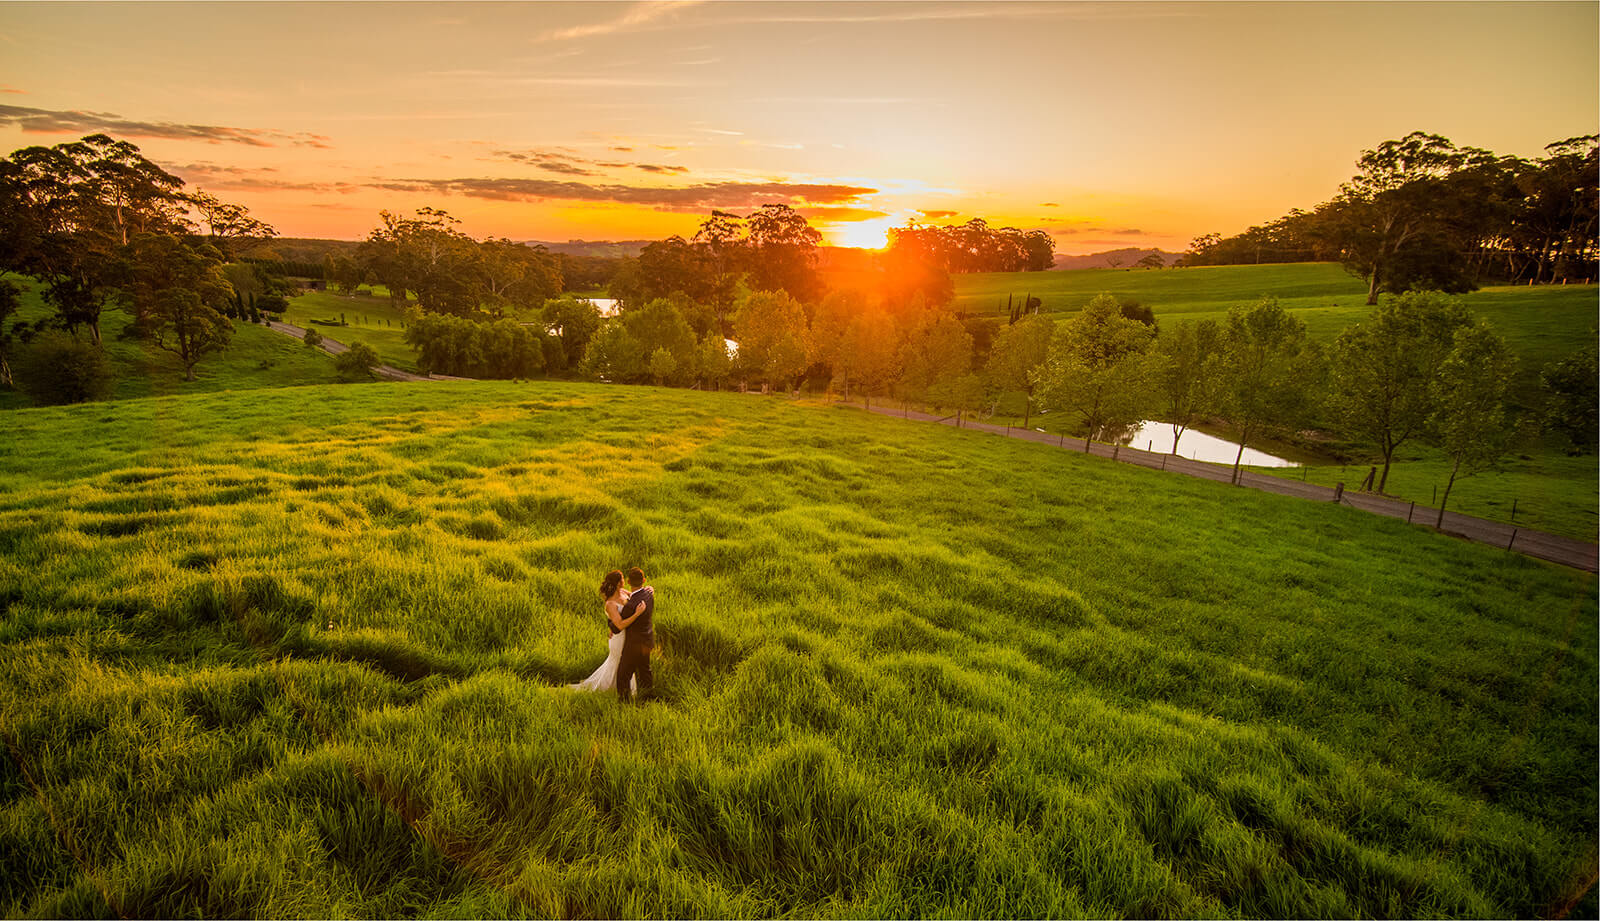 Couple embracing in a lush green field at sunset, with a beautiful pond and trees in the background